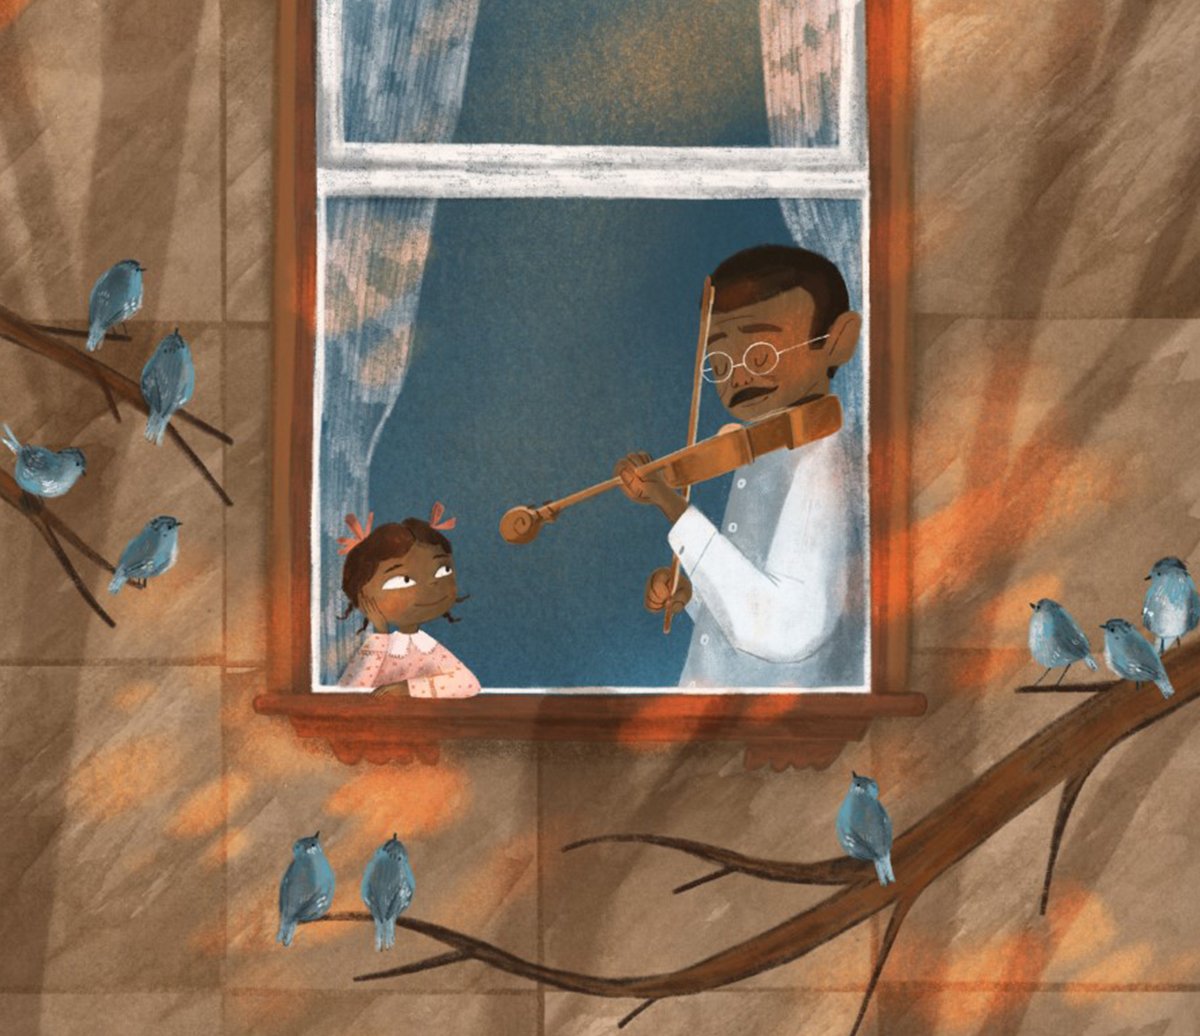 kitty-harris-father-playing-violin-to-daughter.jpg